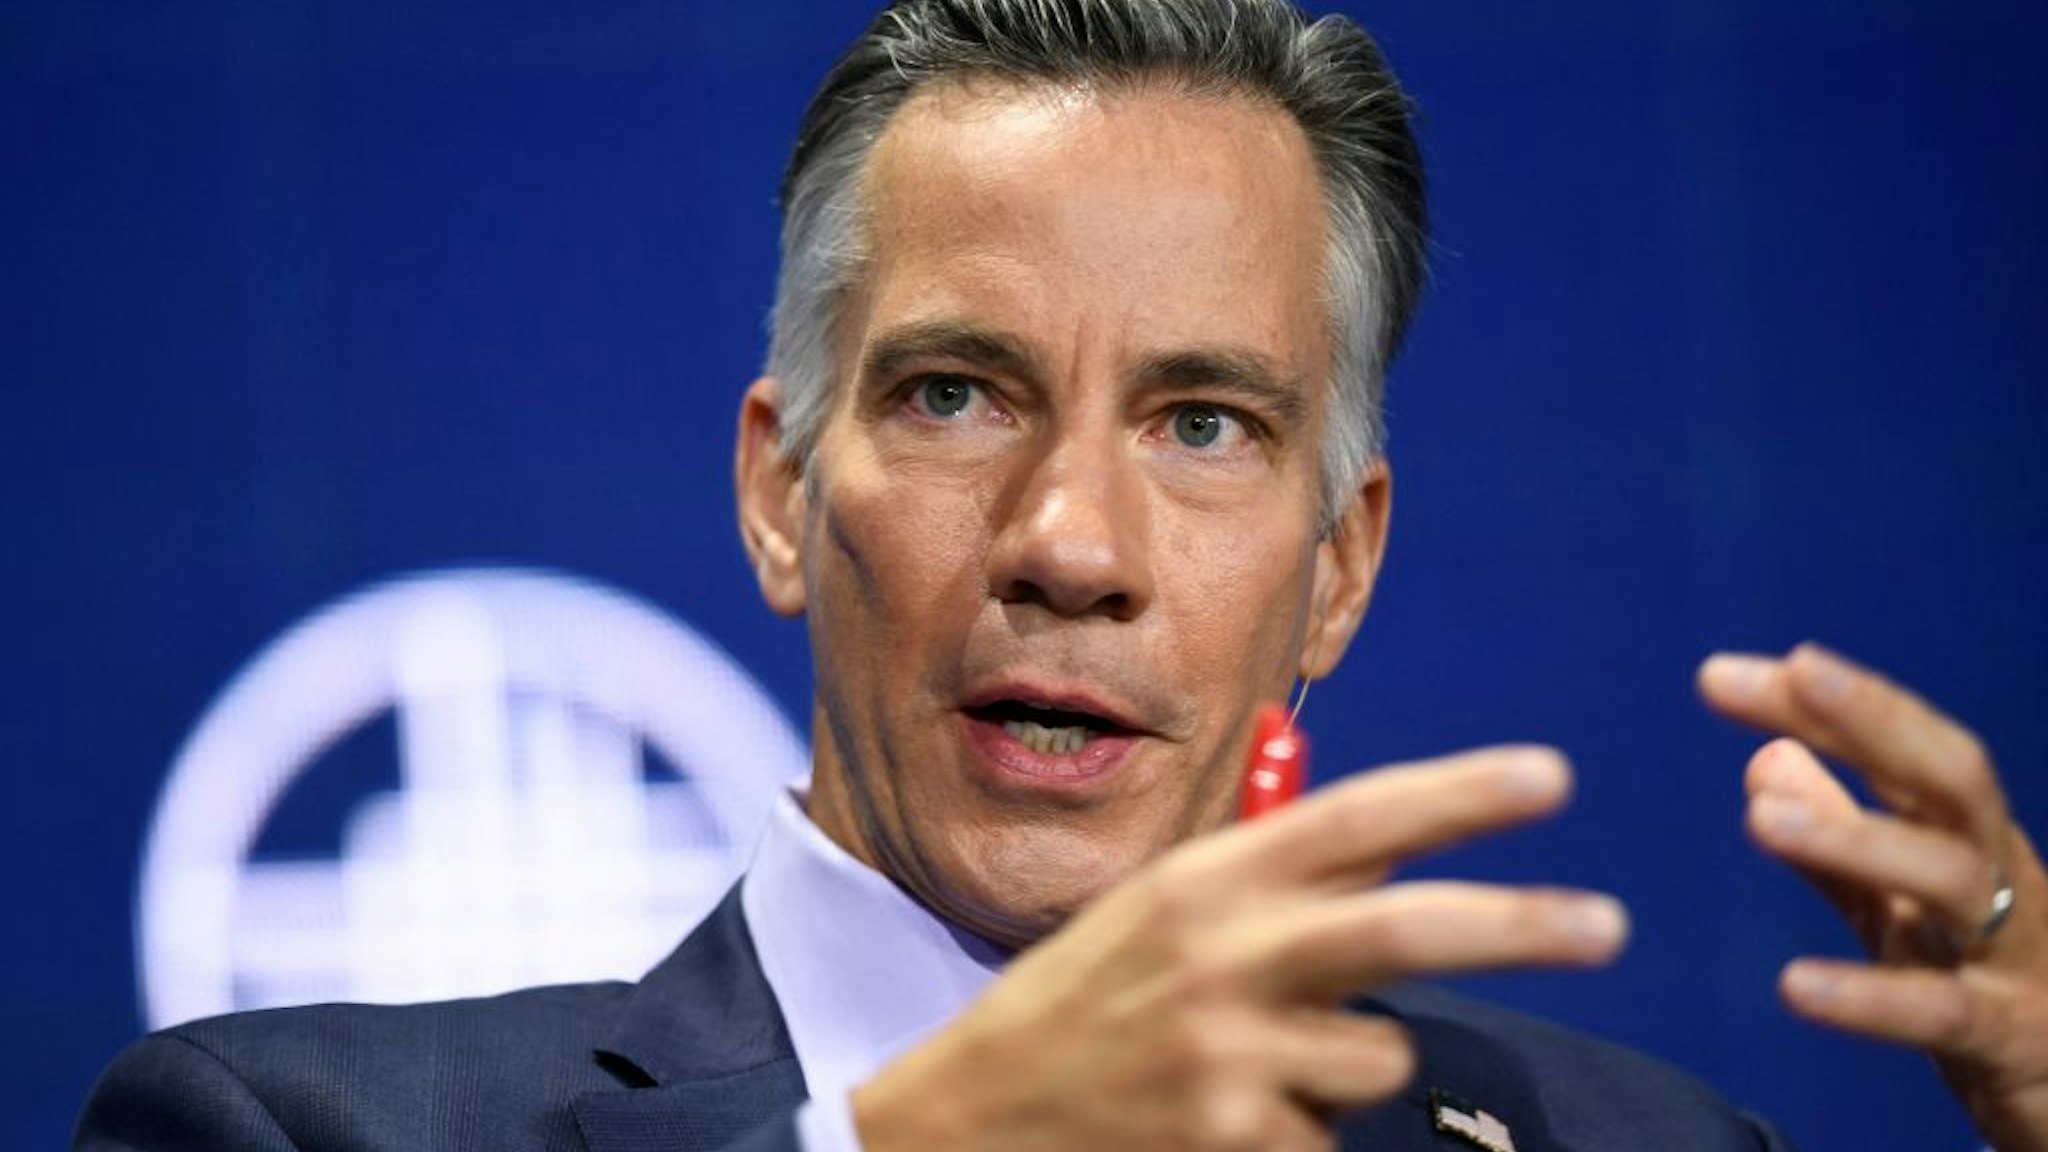 CNN anchor Jim Sciutto speaks during the Milken Institute Global Conference on October 19, 2021 in Beverly Hills, California. (Photo by Patrick T. FALLON / AFP) (Photo by PATRICK T. FALLON/AFP via Getty Images)